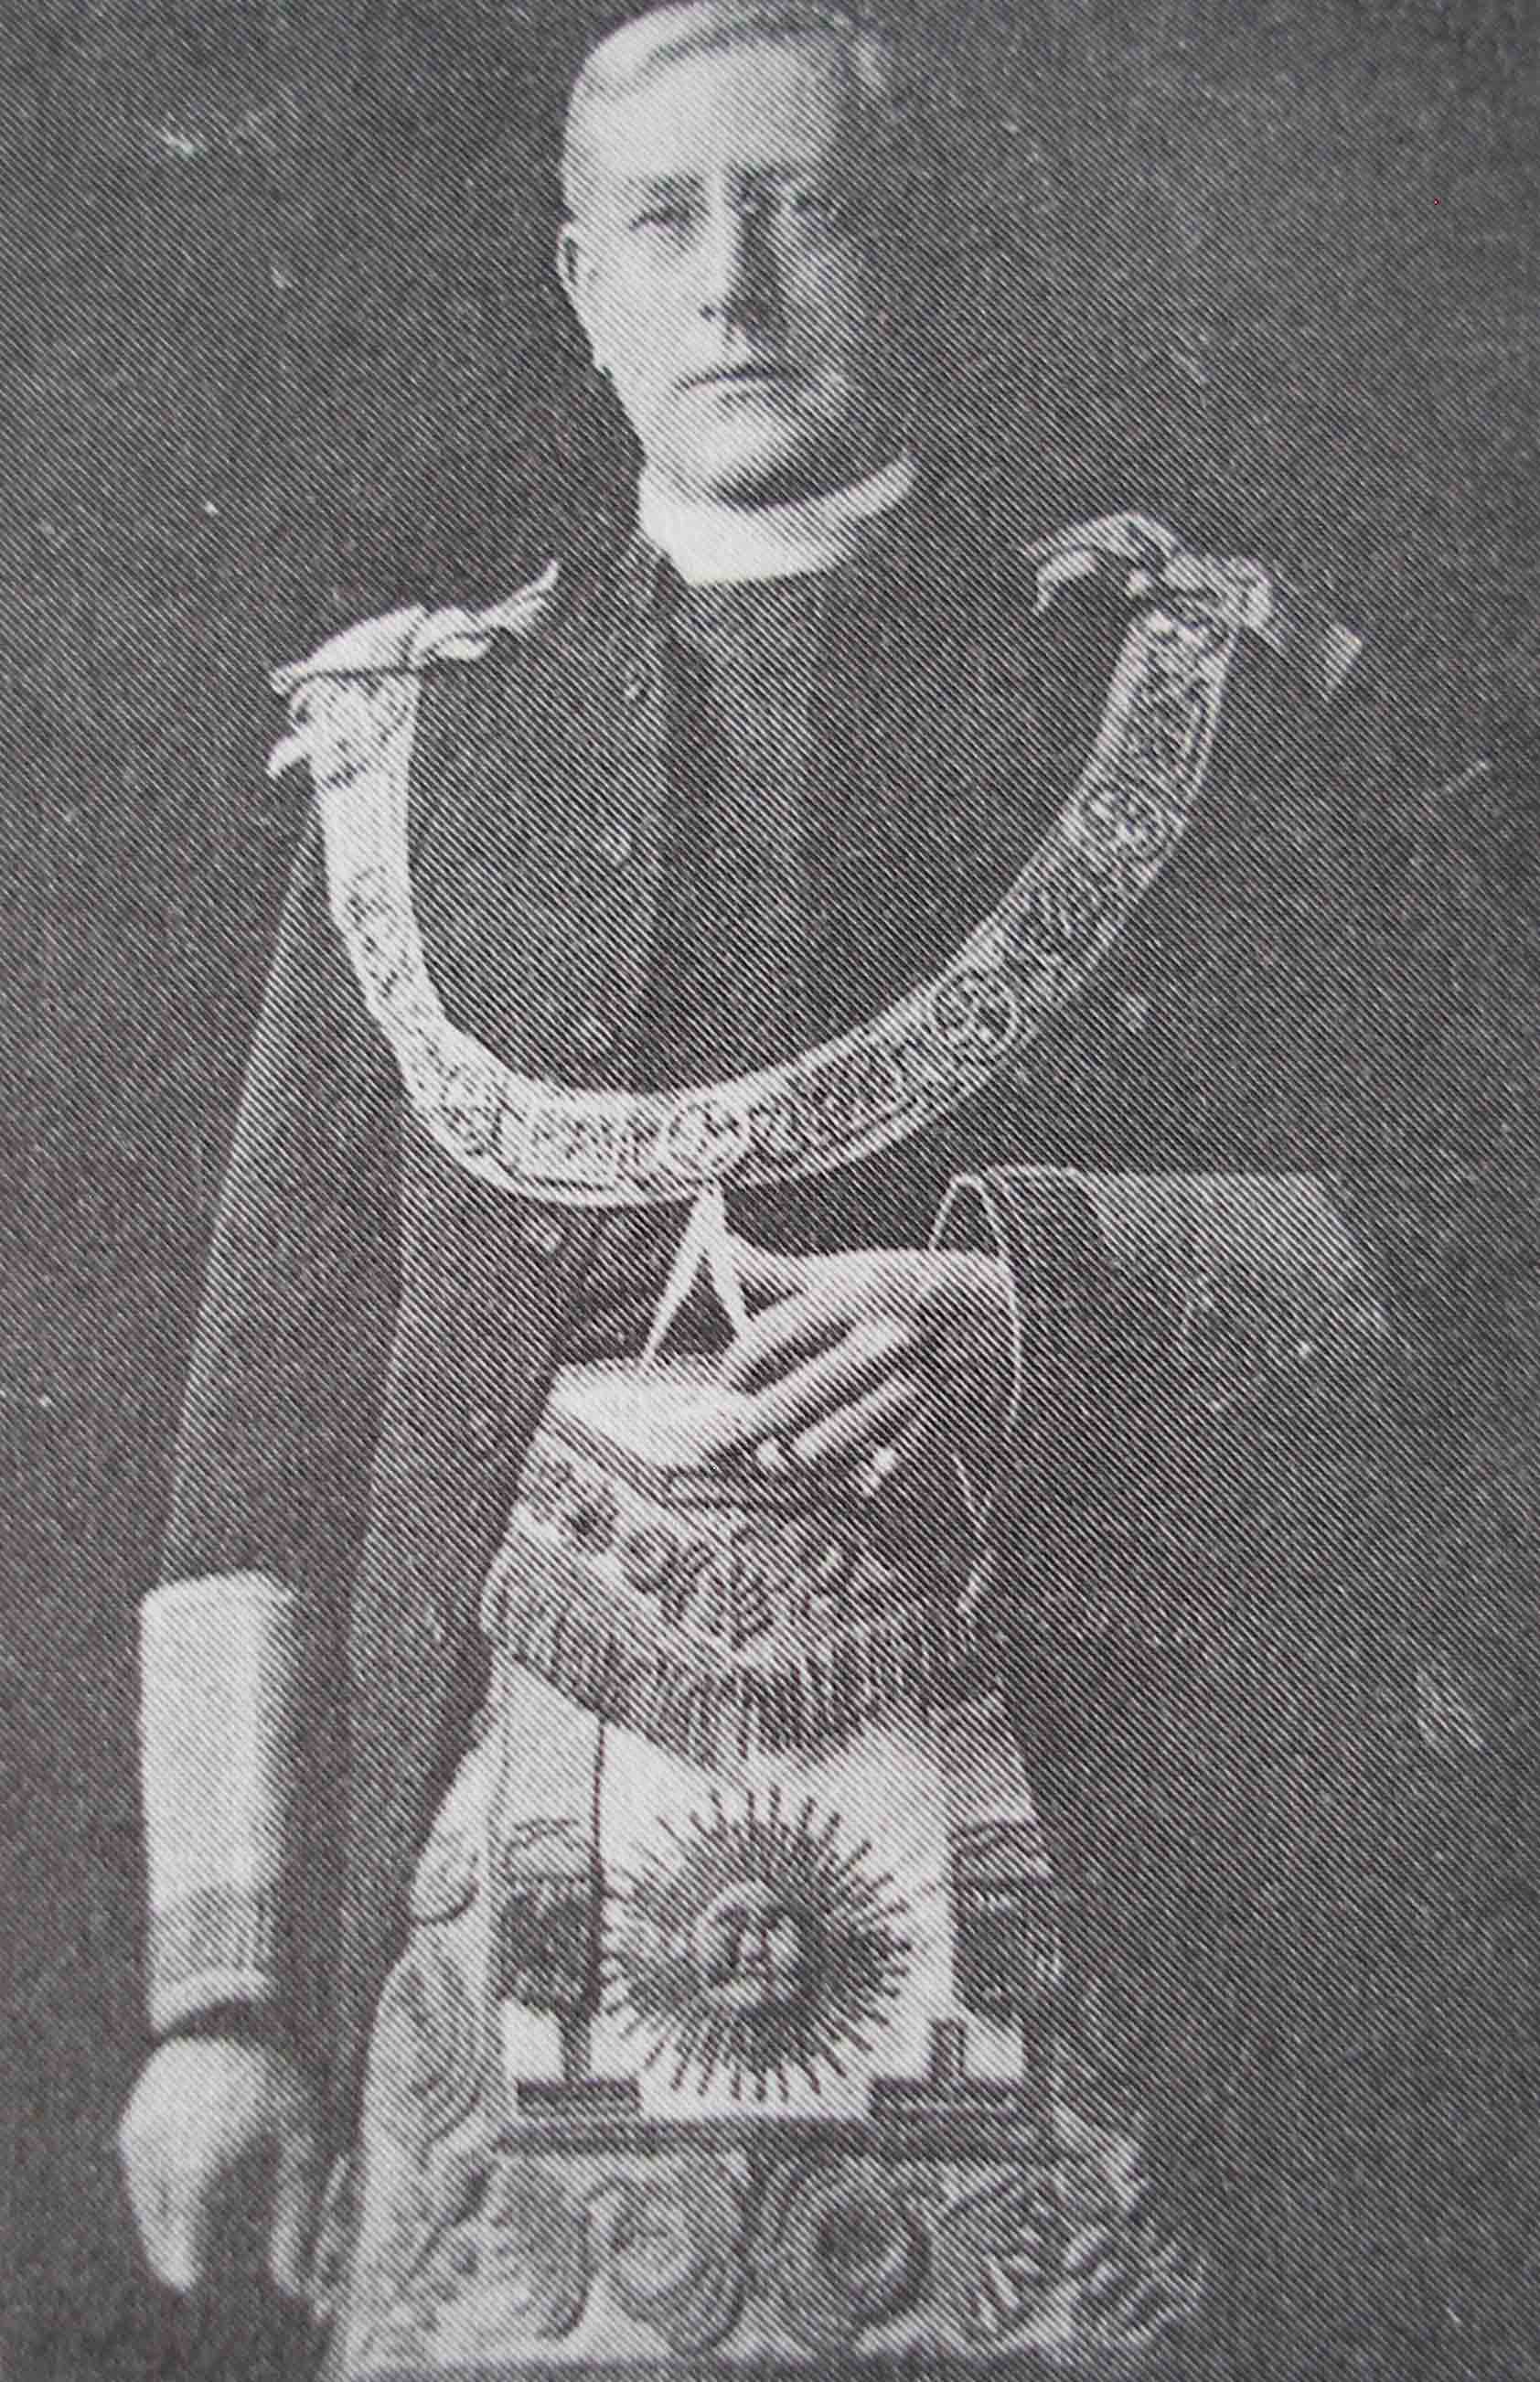 Most Worshipful Brother Reverend Cato Ensor Sharp as Grand Master, 1903